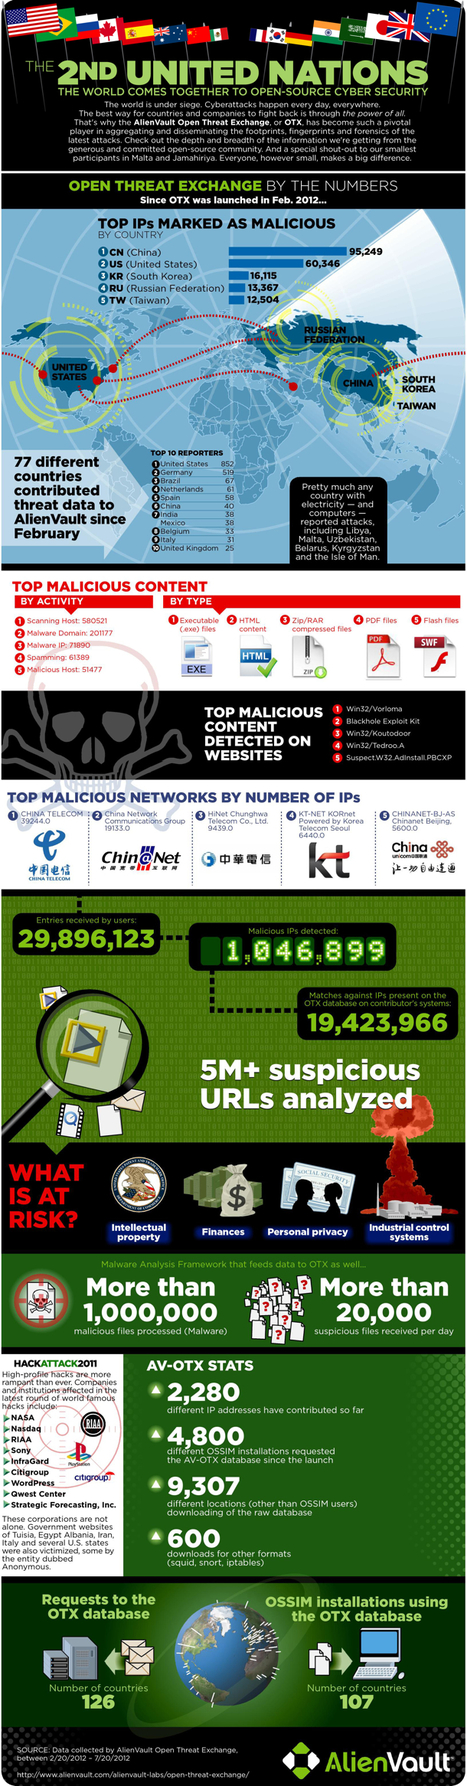 Why Cyber Security is Important [Infographic] | 21st Century Learning and Teaching | Scoop.it